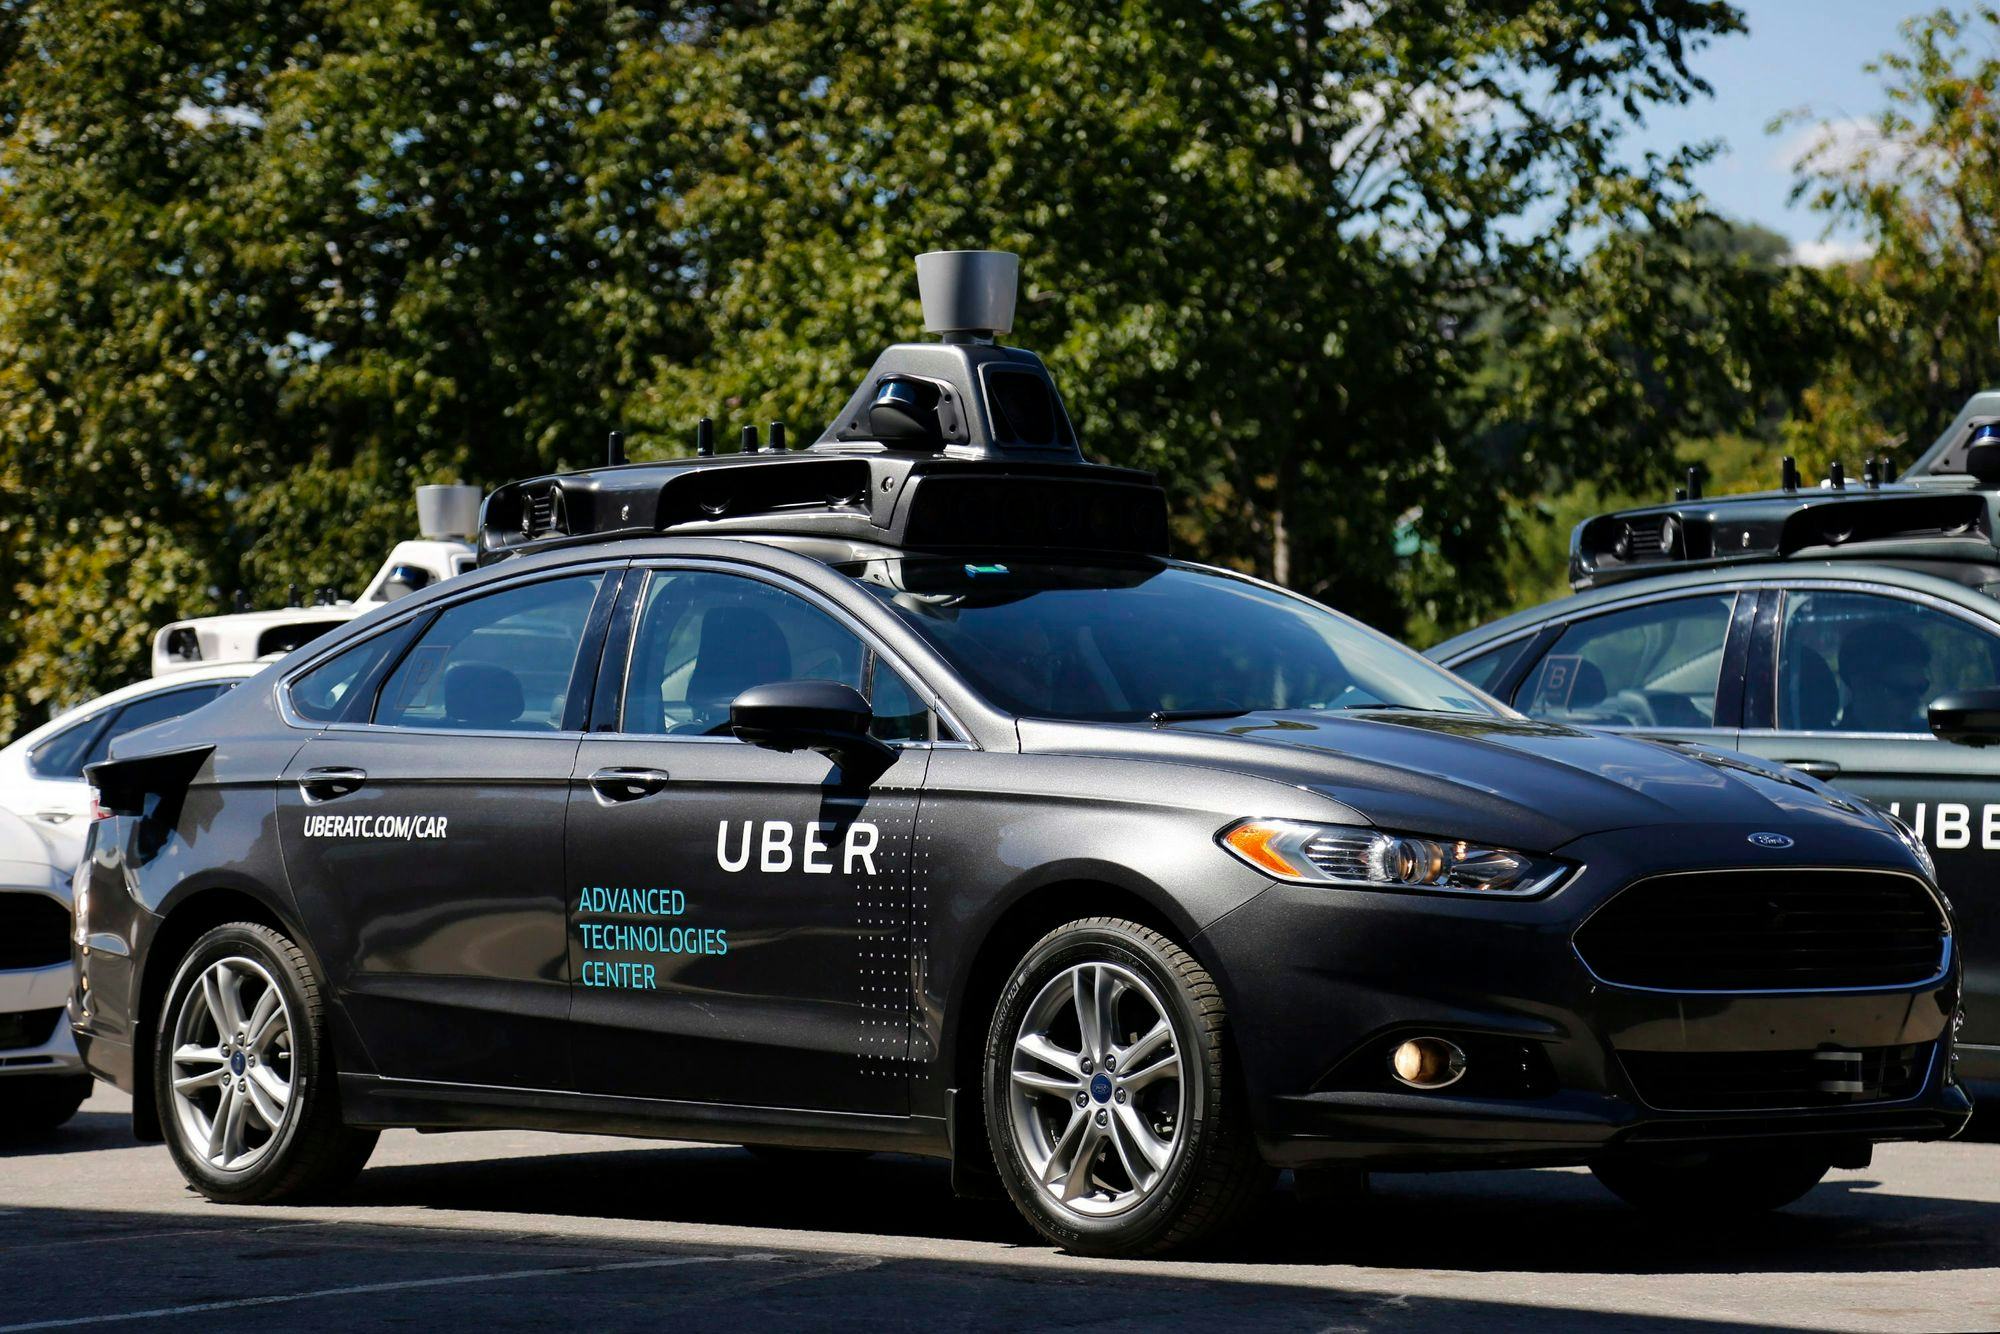 Lobby Roundup: Uber wants to talk with the federal government about testing self-driving cars